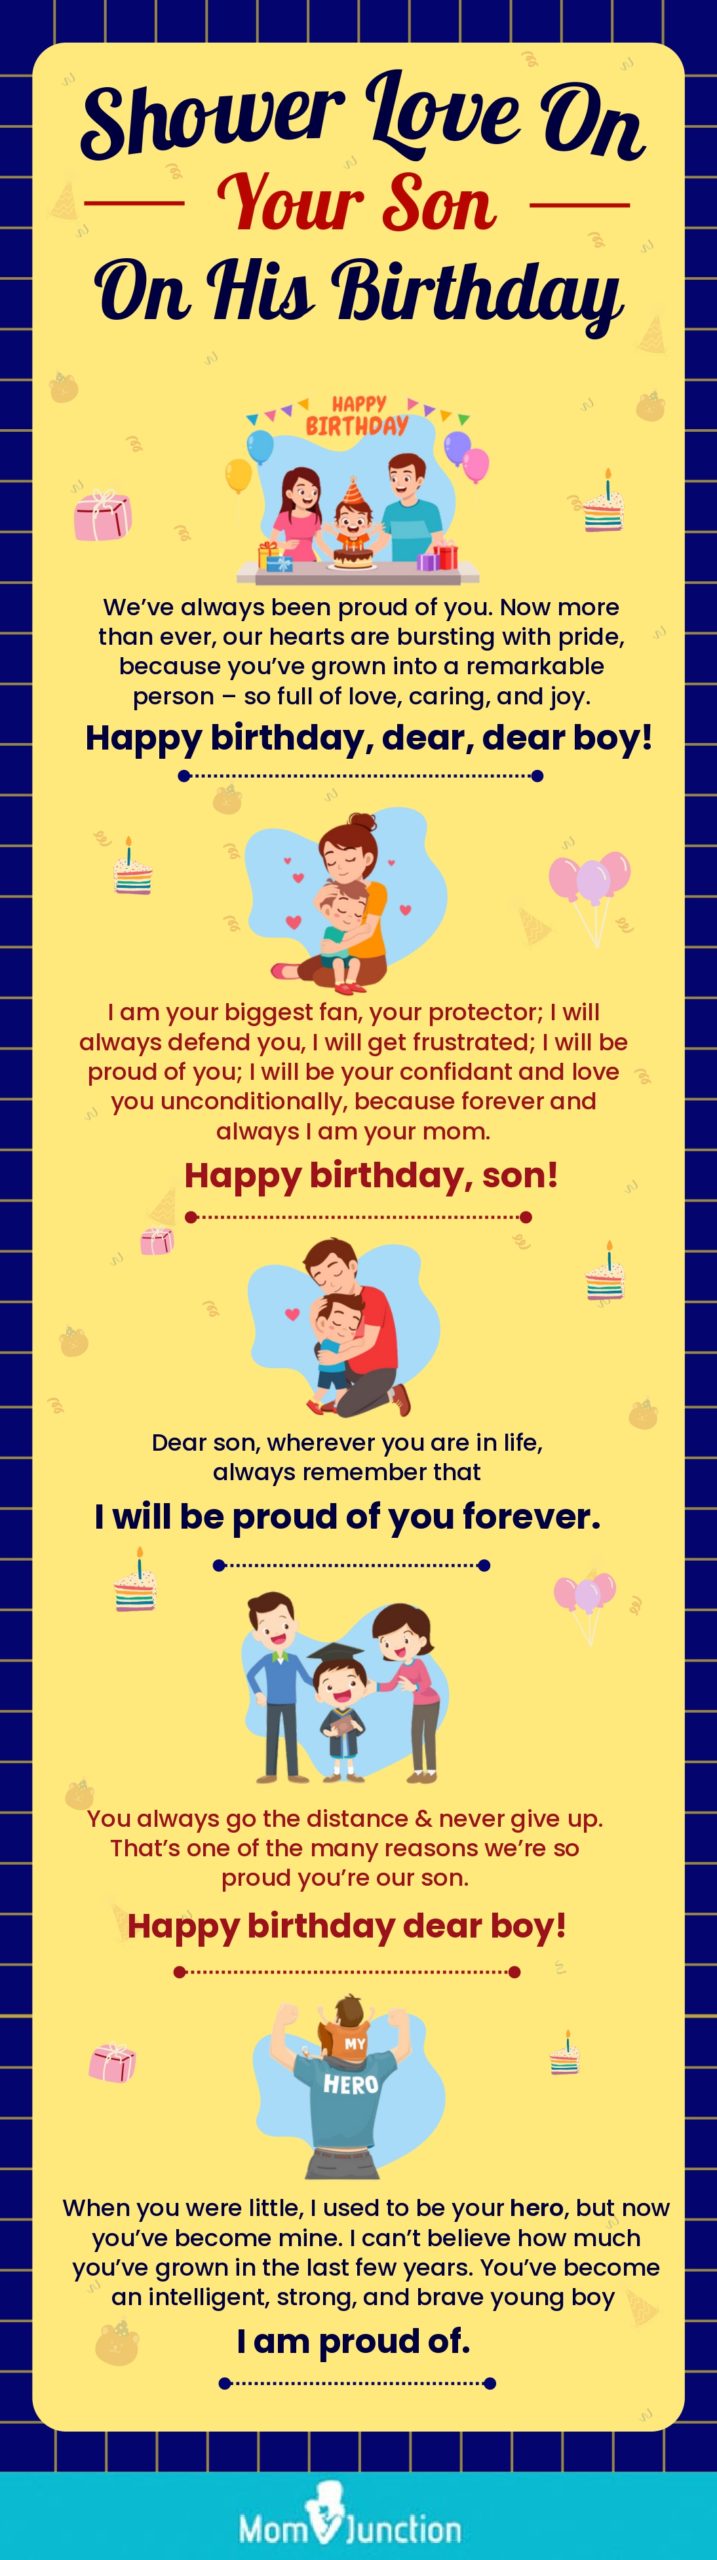 shower love on your son on his birthday (infographic)